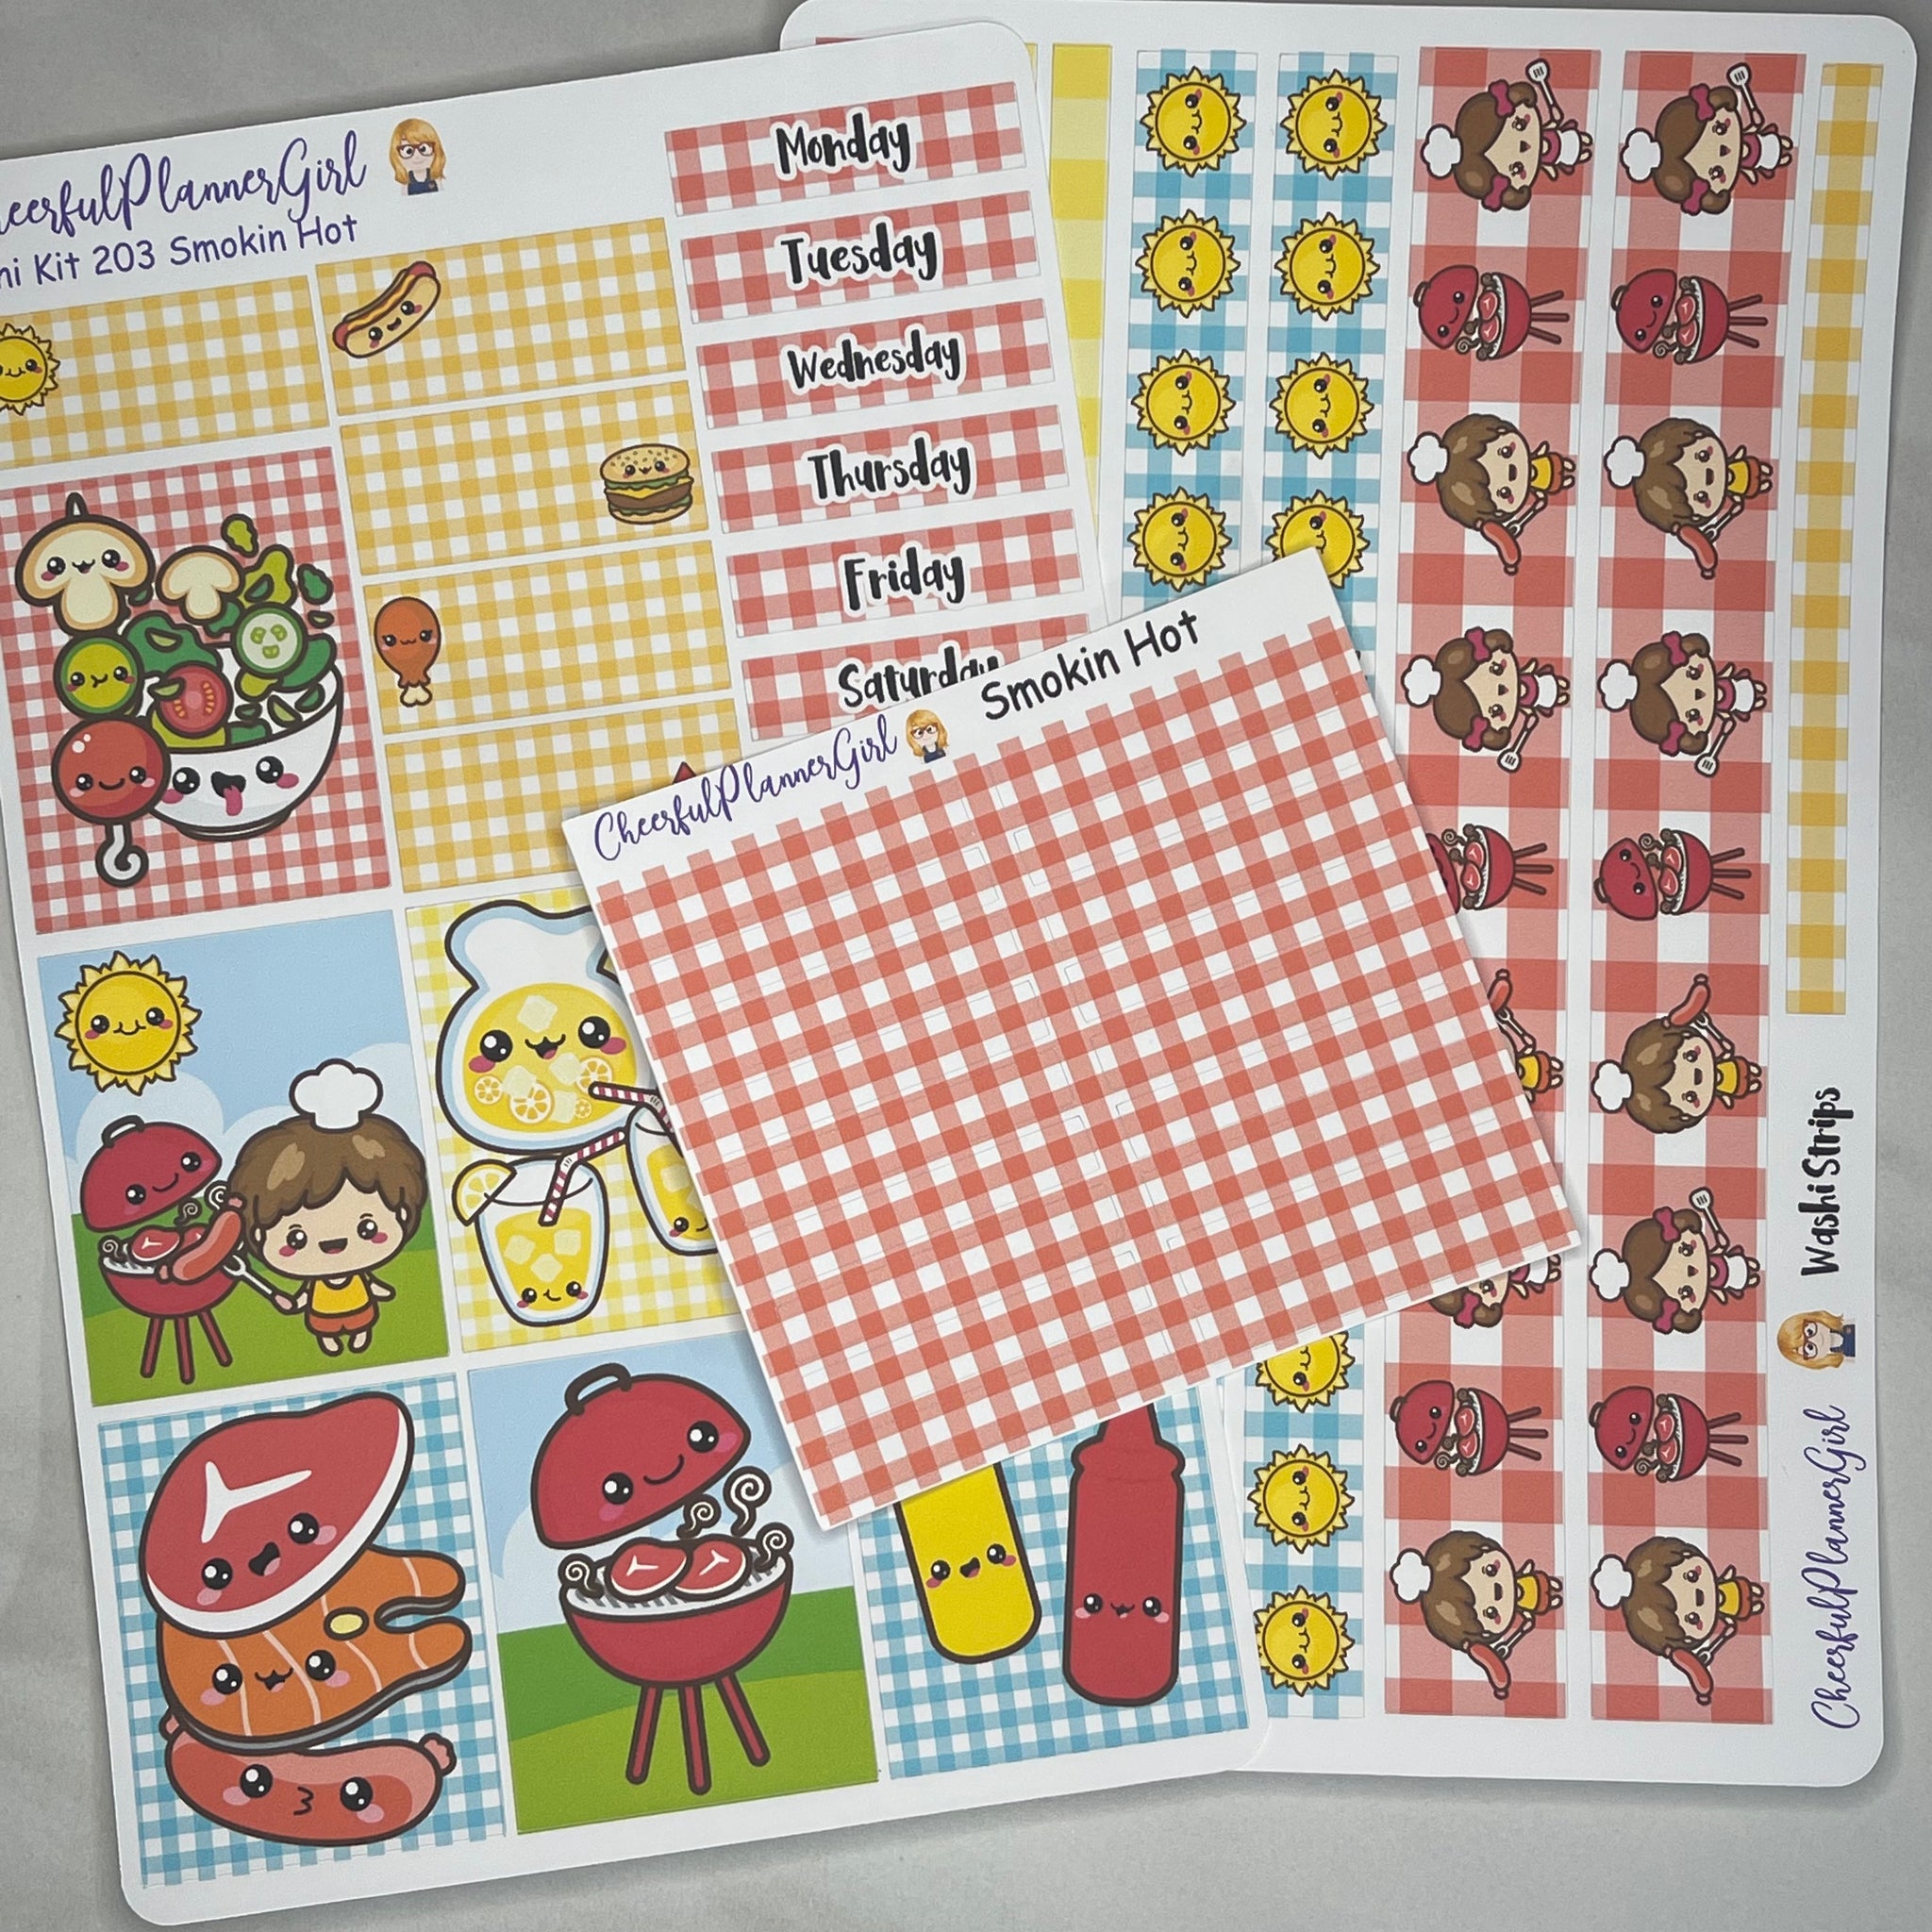 Smokin Hot Mini Kit Weekly Layout Planner Stickers BBQ Summer Grill